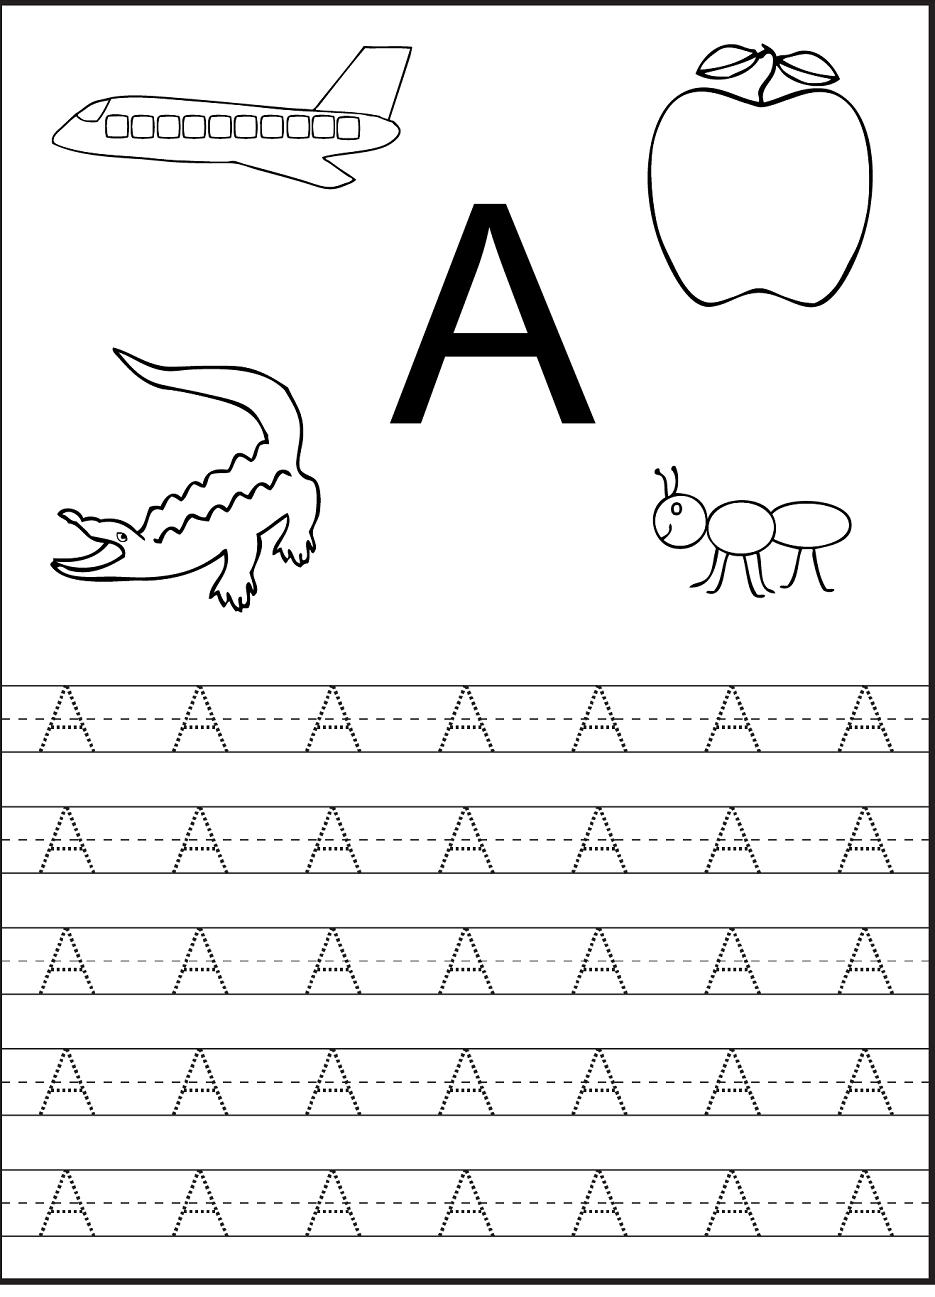 Tracing The Letter A Free Printable | Preschool Worksheets for Free Tracing Alphabet Letters